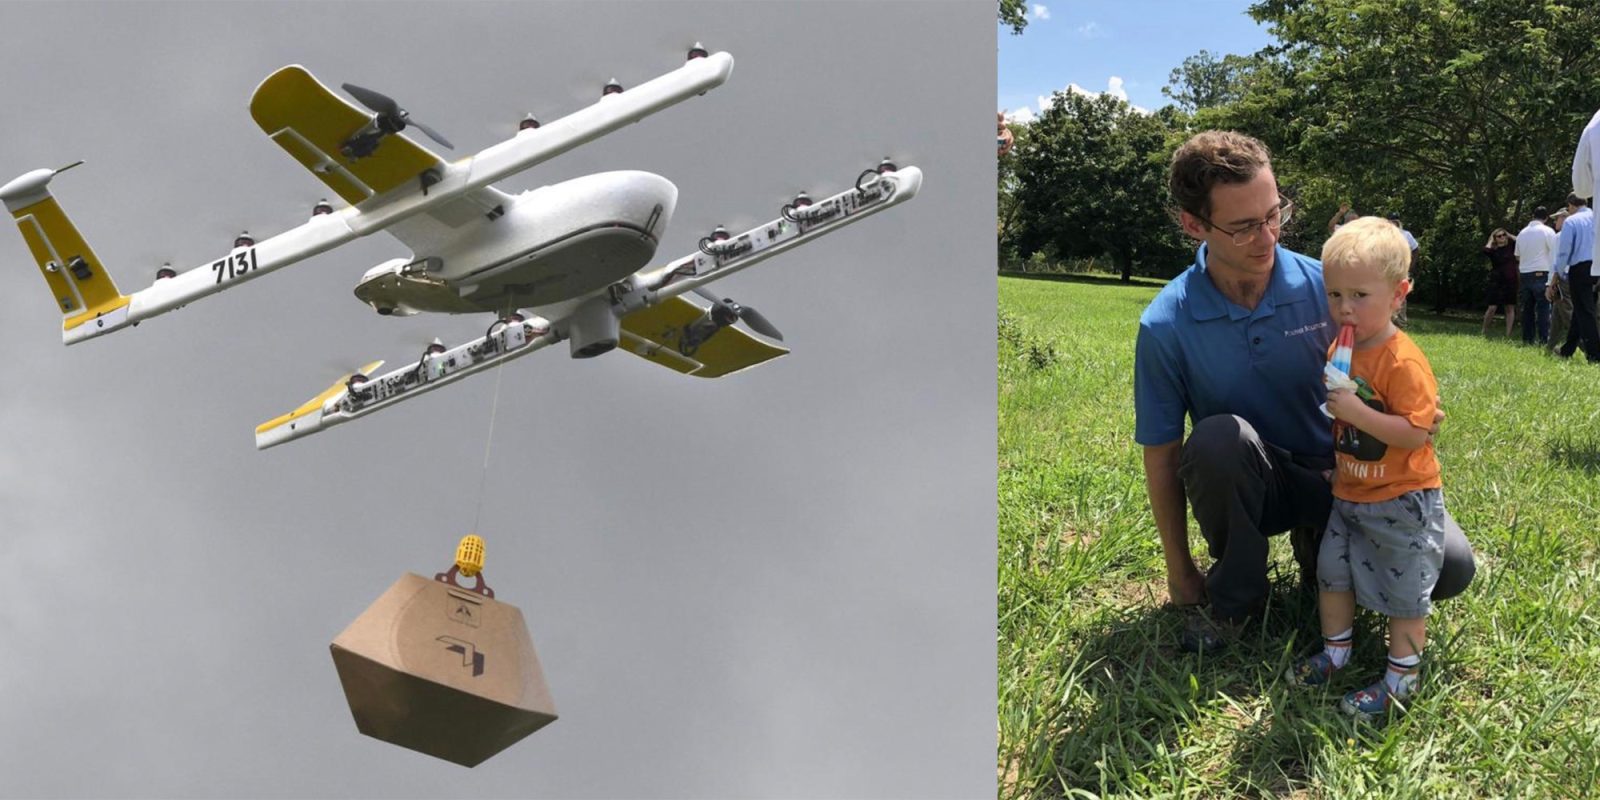 The FAA celebrates the first four successful drone delivery tests